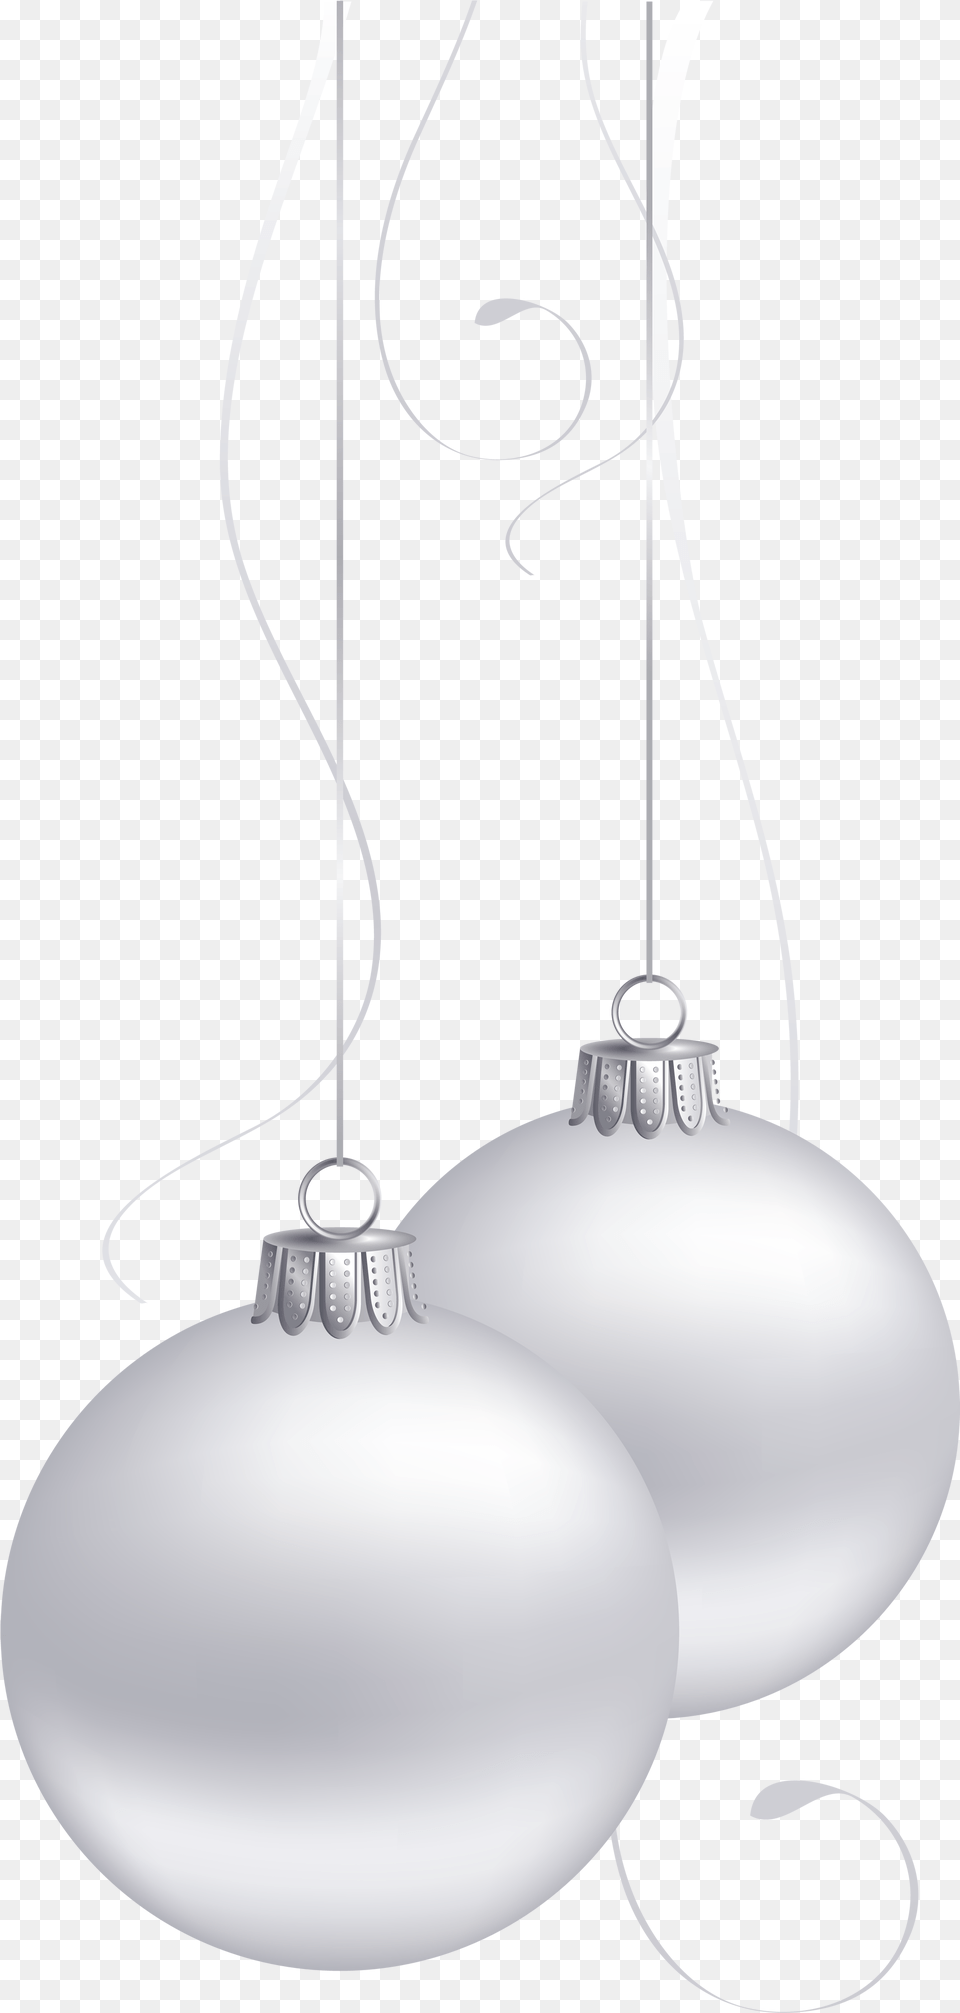 White Christmas Balls Image Christmas Ball Clipart White, Accessories, Lighting, Chandelier, Lamp Png